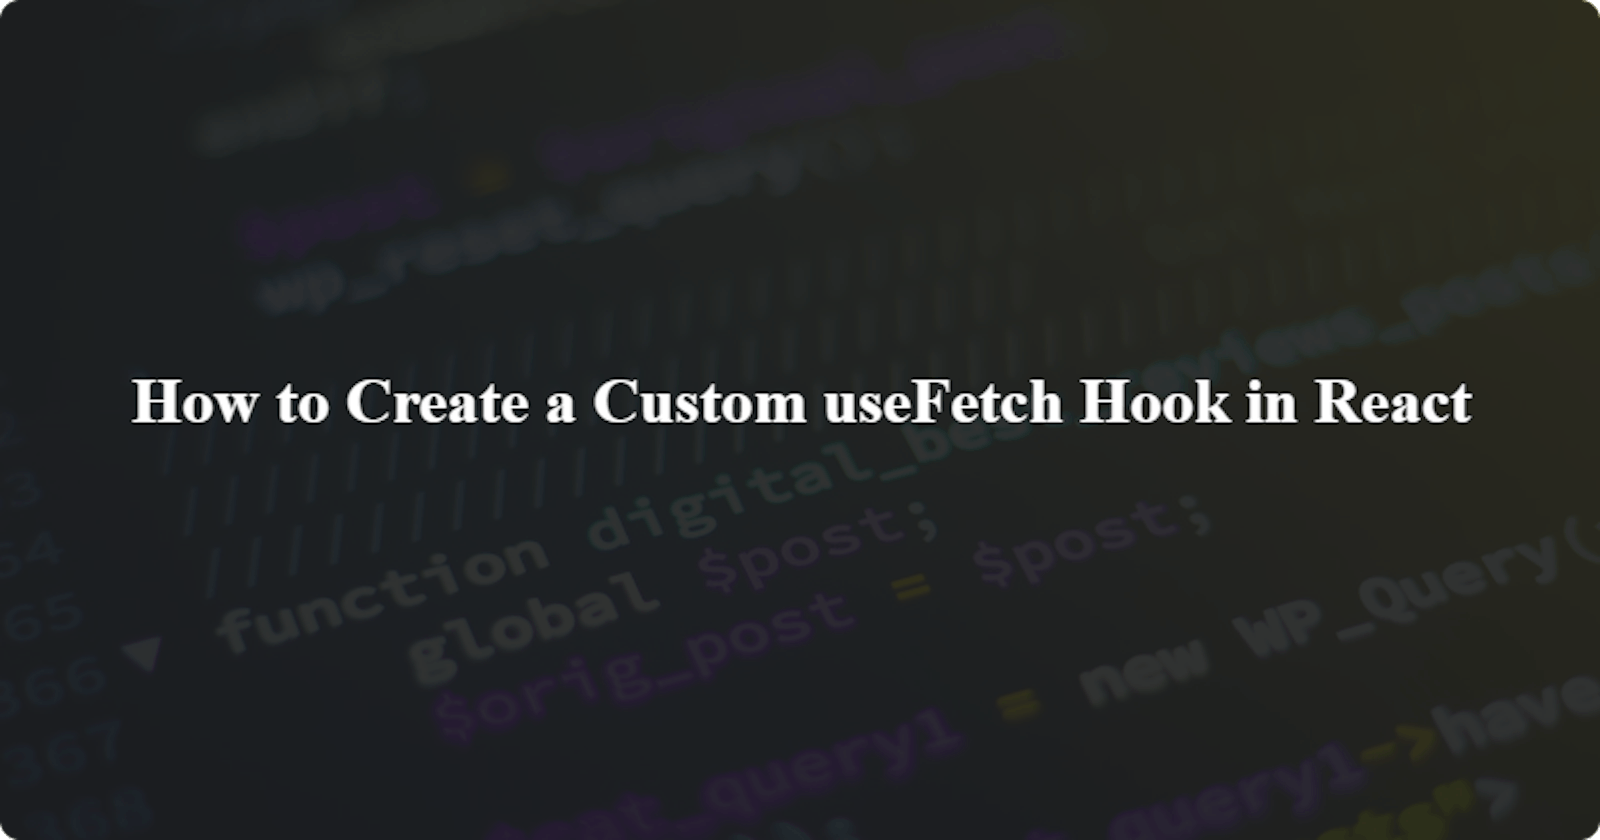 How to Create a Custom useFetch Hook in React